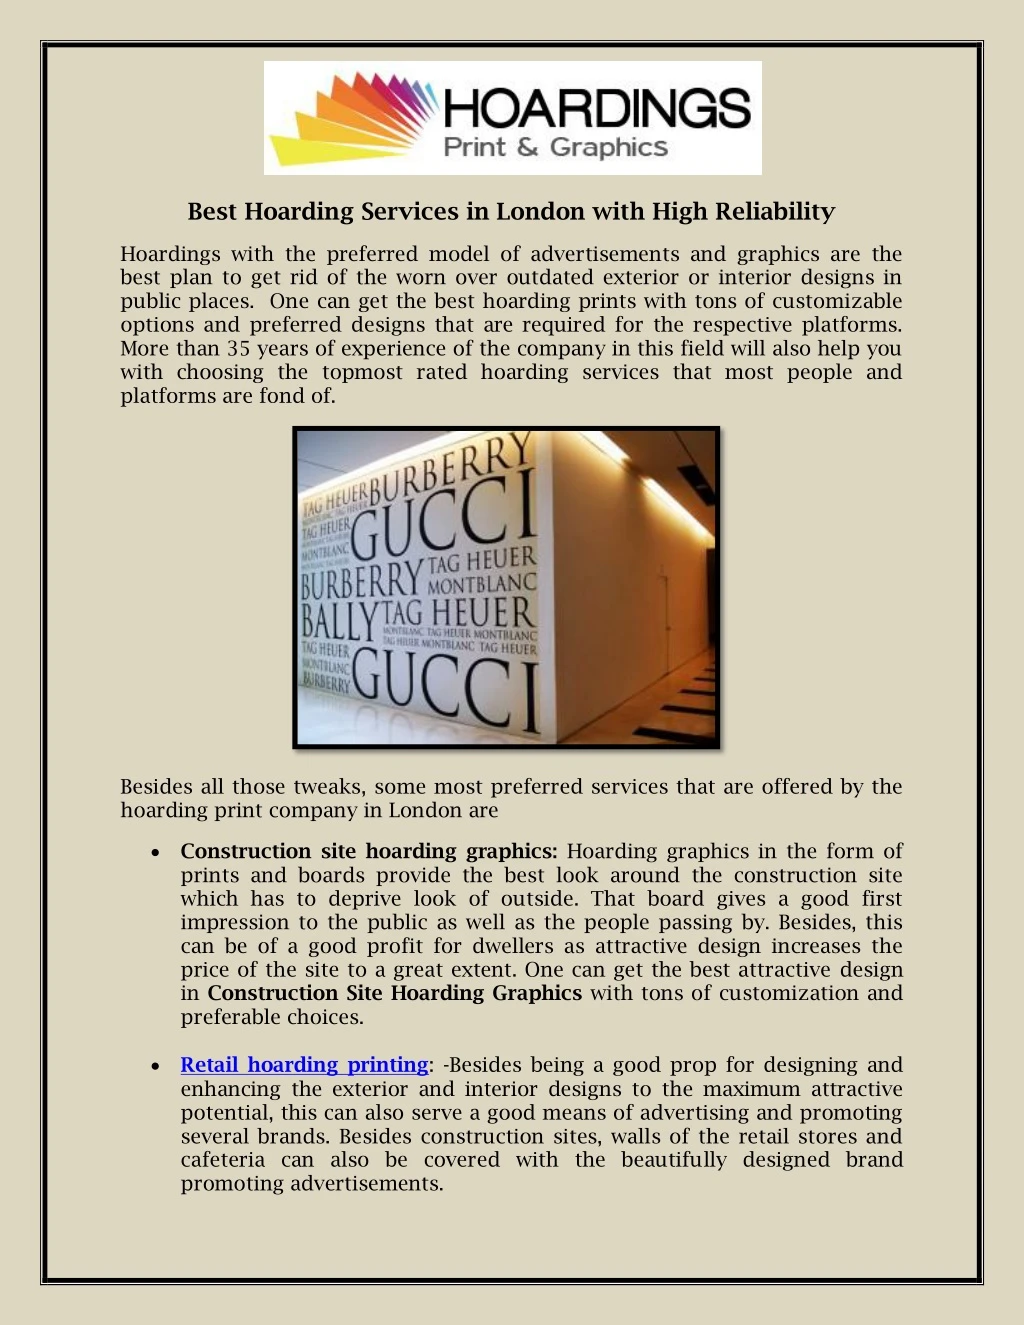 best hoarding services in london with high